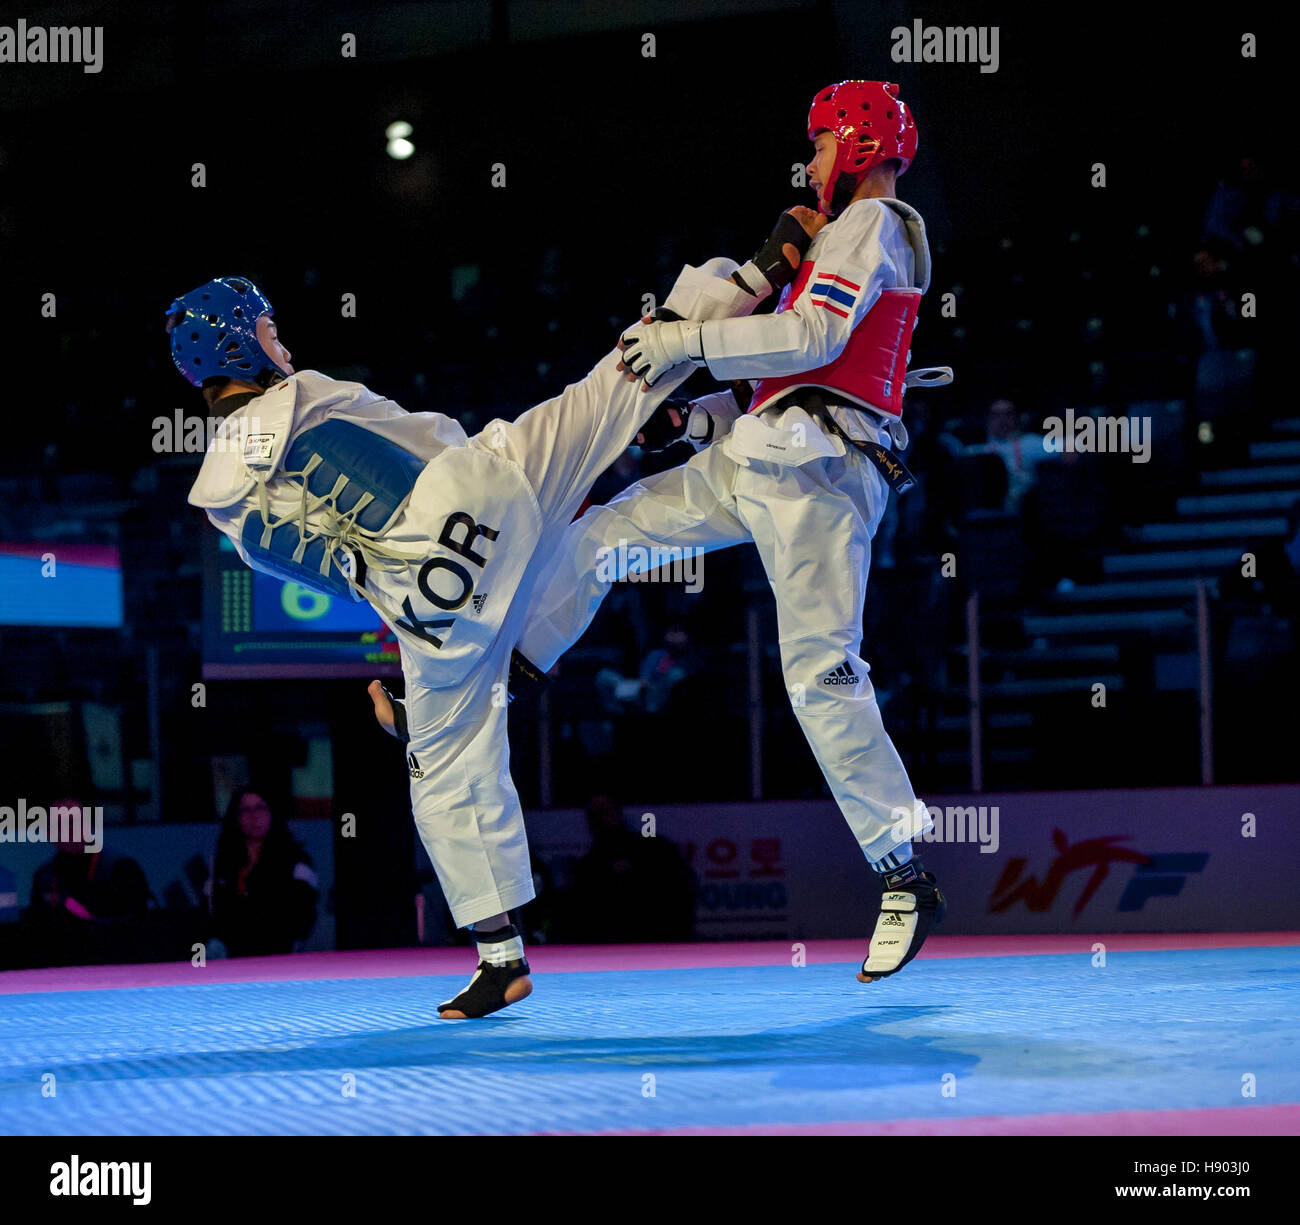 Burnaby, Canada. 16th Nov, 2016. WTF World Taekwondo Junior Championships, Jae-hee Mok (KOR) blue and Saran Tangchatkaew (THA) red, compete in male 48kg class gold medal match. Mok took the gold medal Credit:  Peter Llewellyn/Alamy Live News Stock Photo